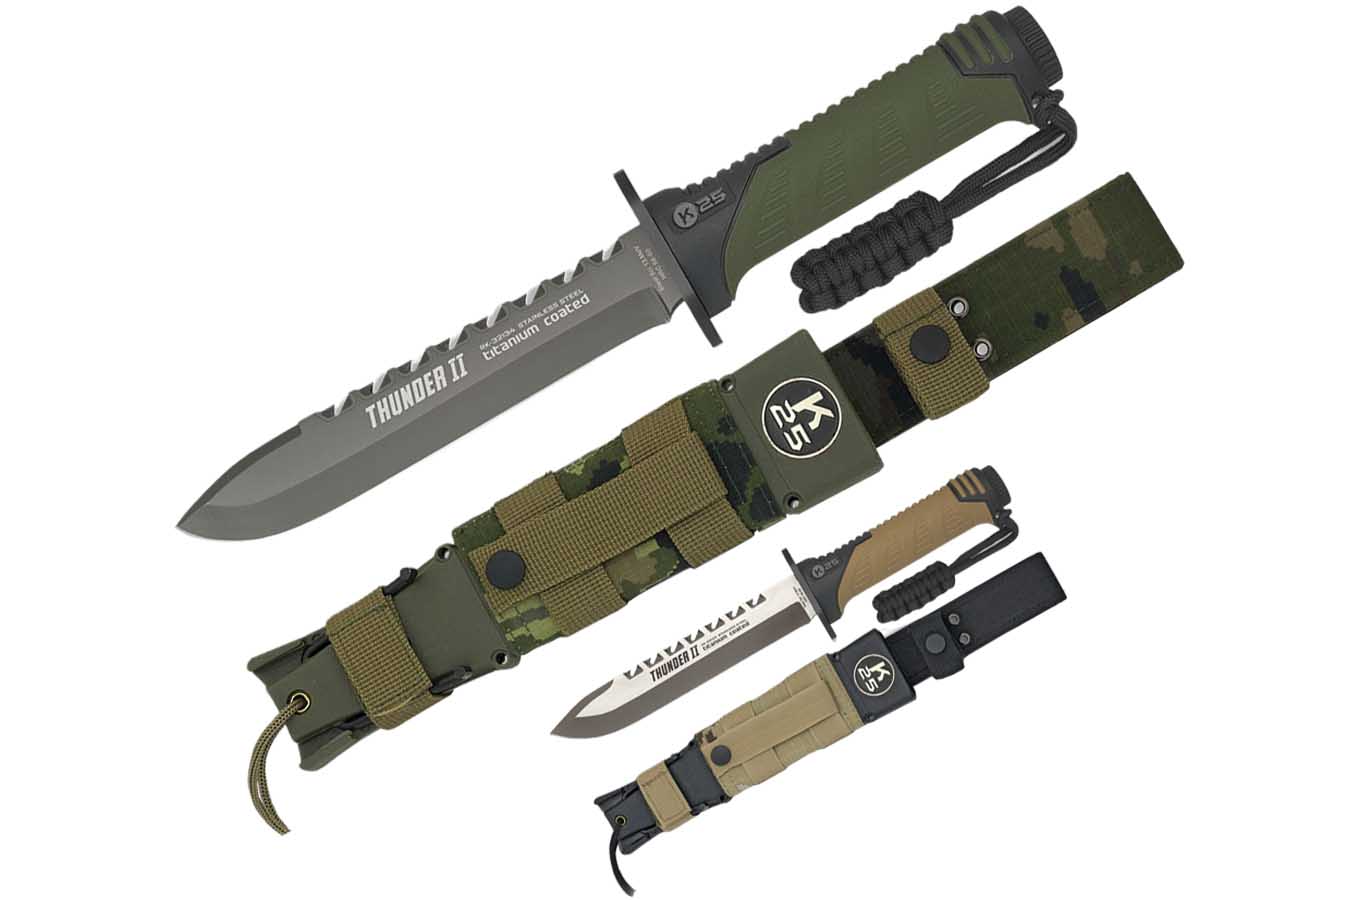 Hunting knife, with survival kit - Thunder II, K25